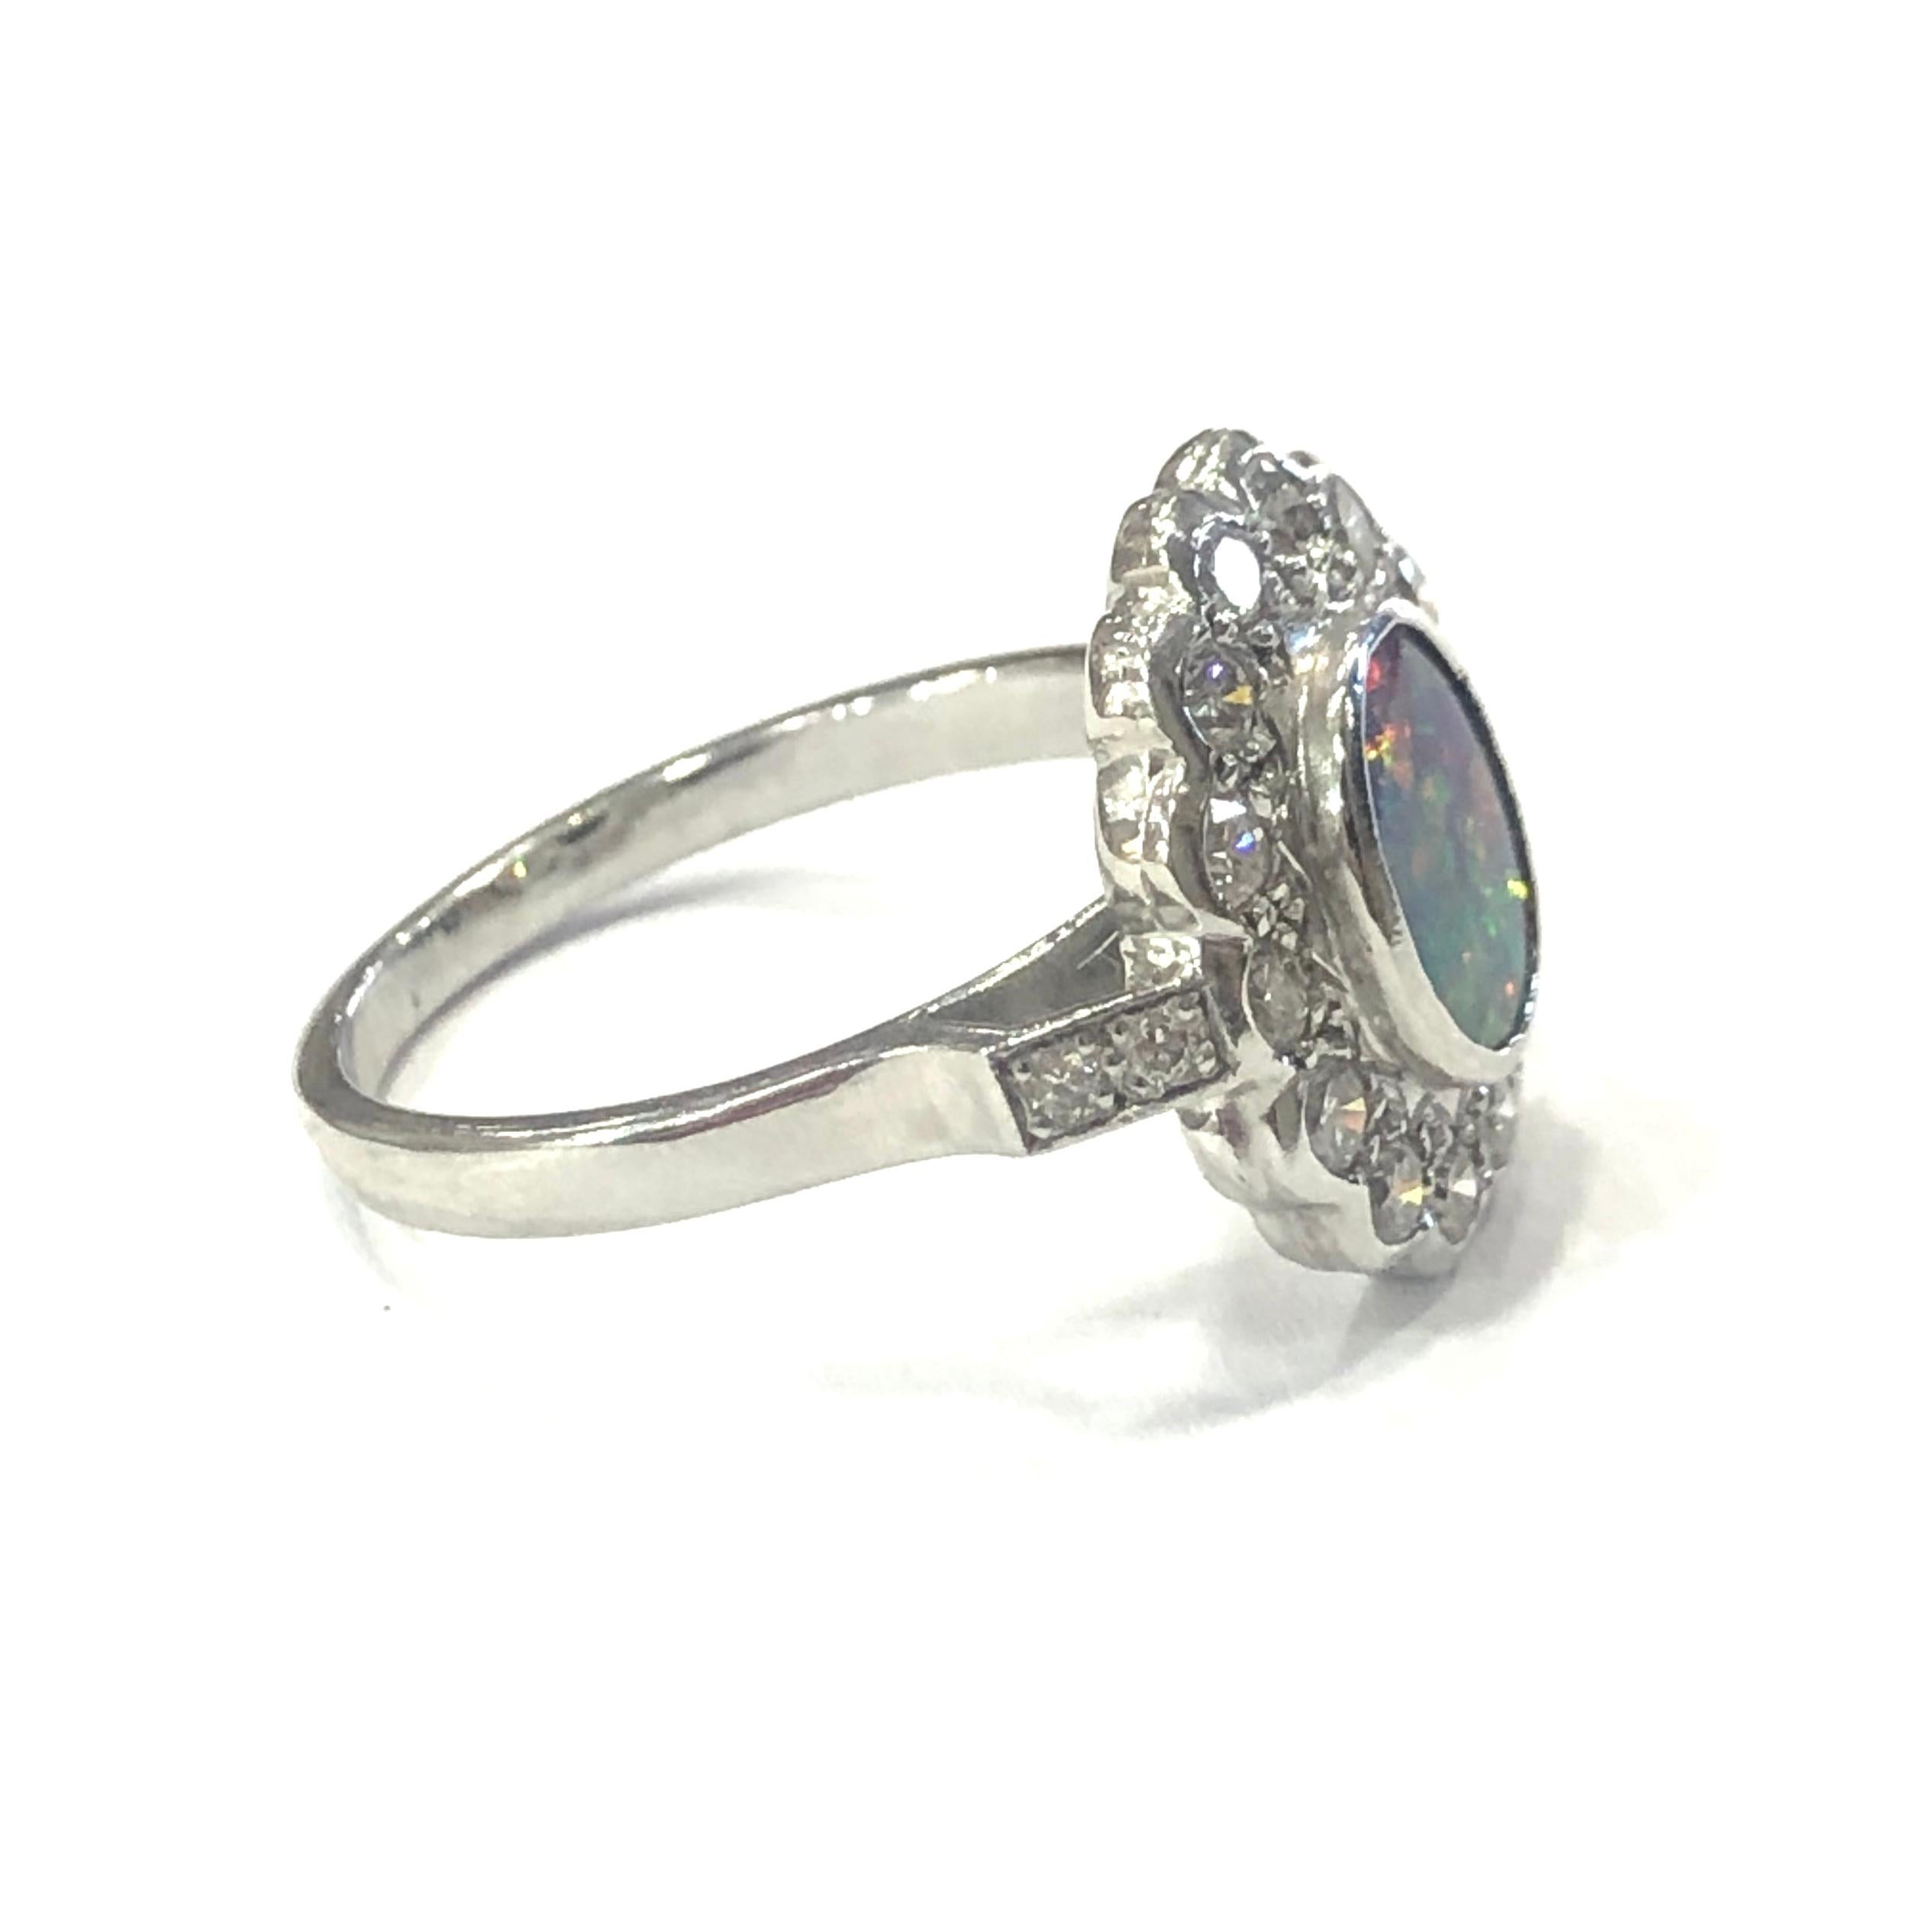 18ct White Gold Opal and Diamond Cluster Ring. Set with one central oval Australian Opal in a rubber setting, surrounded by fourteen round brilliant cut diamonds and two diamonds on each shoulder.

Approximate Opal weight : 1.20ct
Approximate total